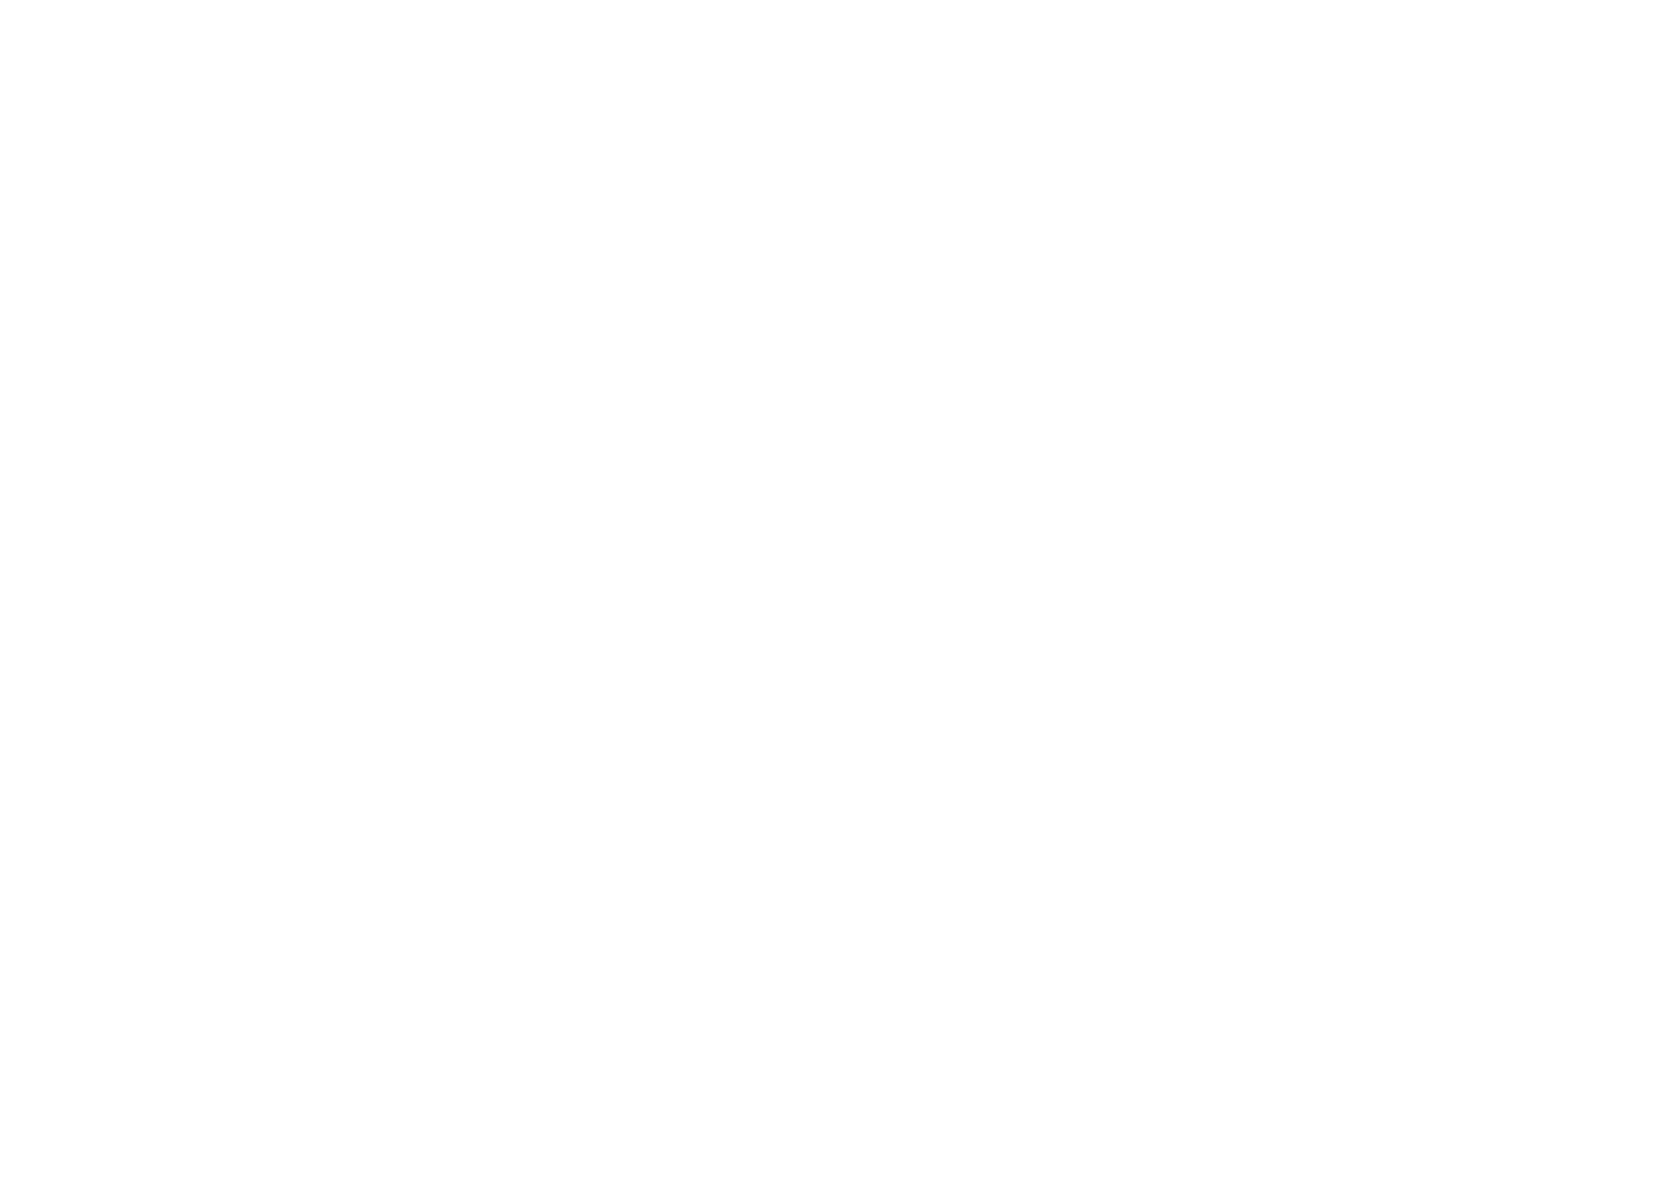 LUMIX Stories for Change